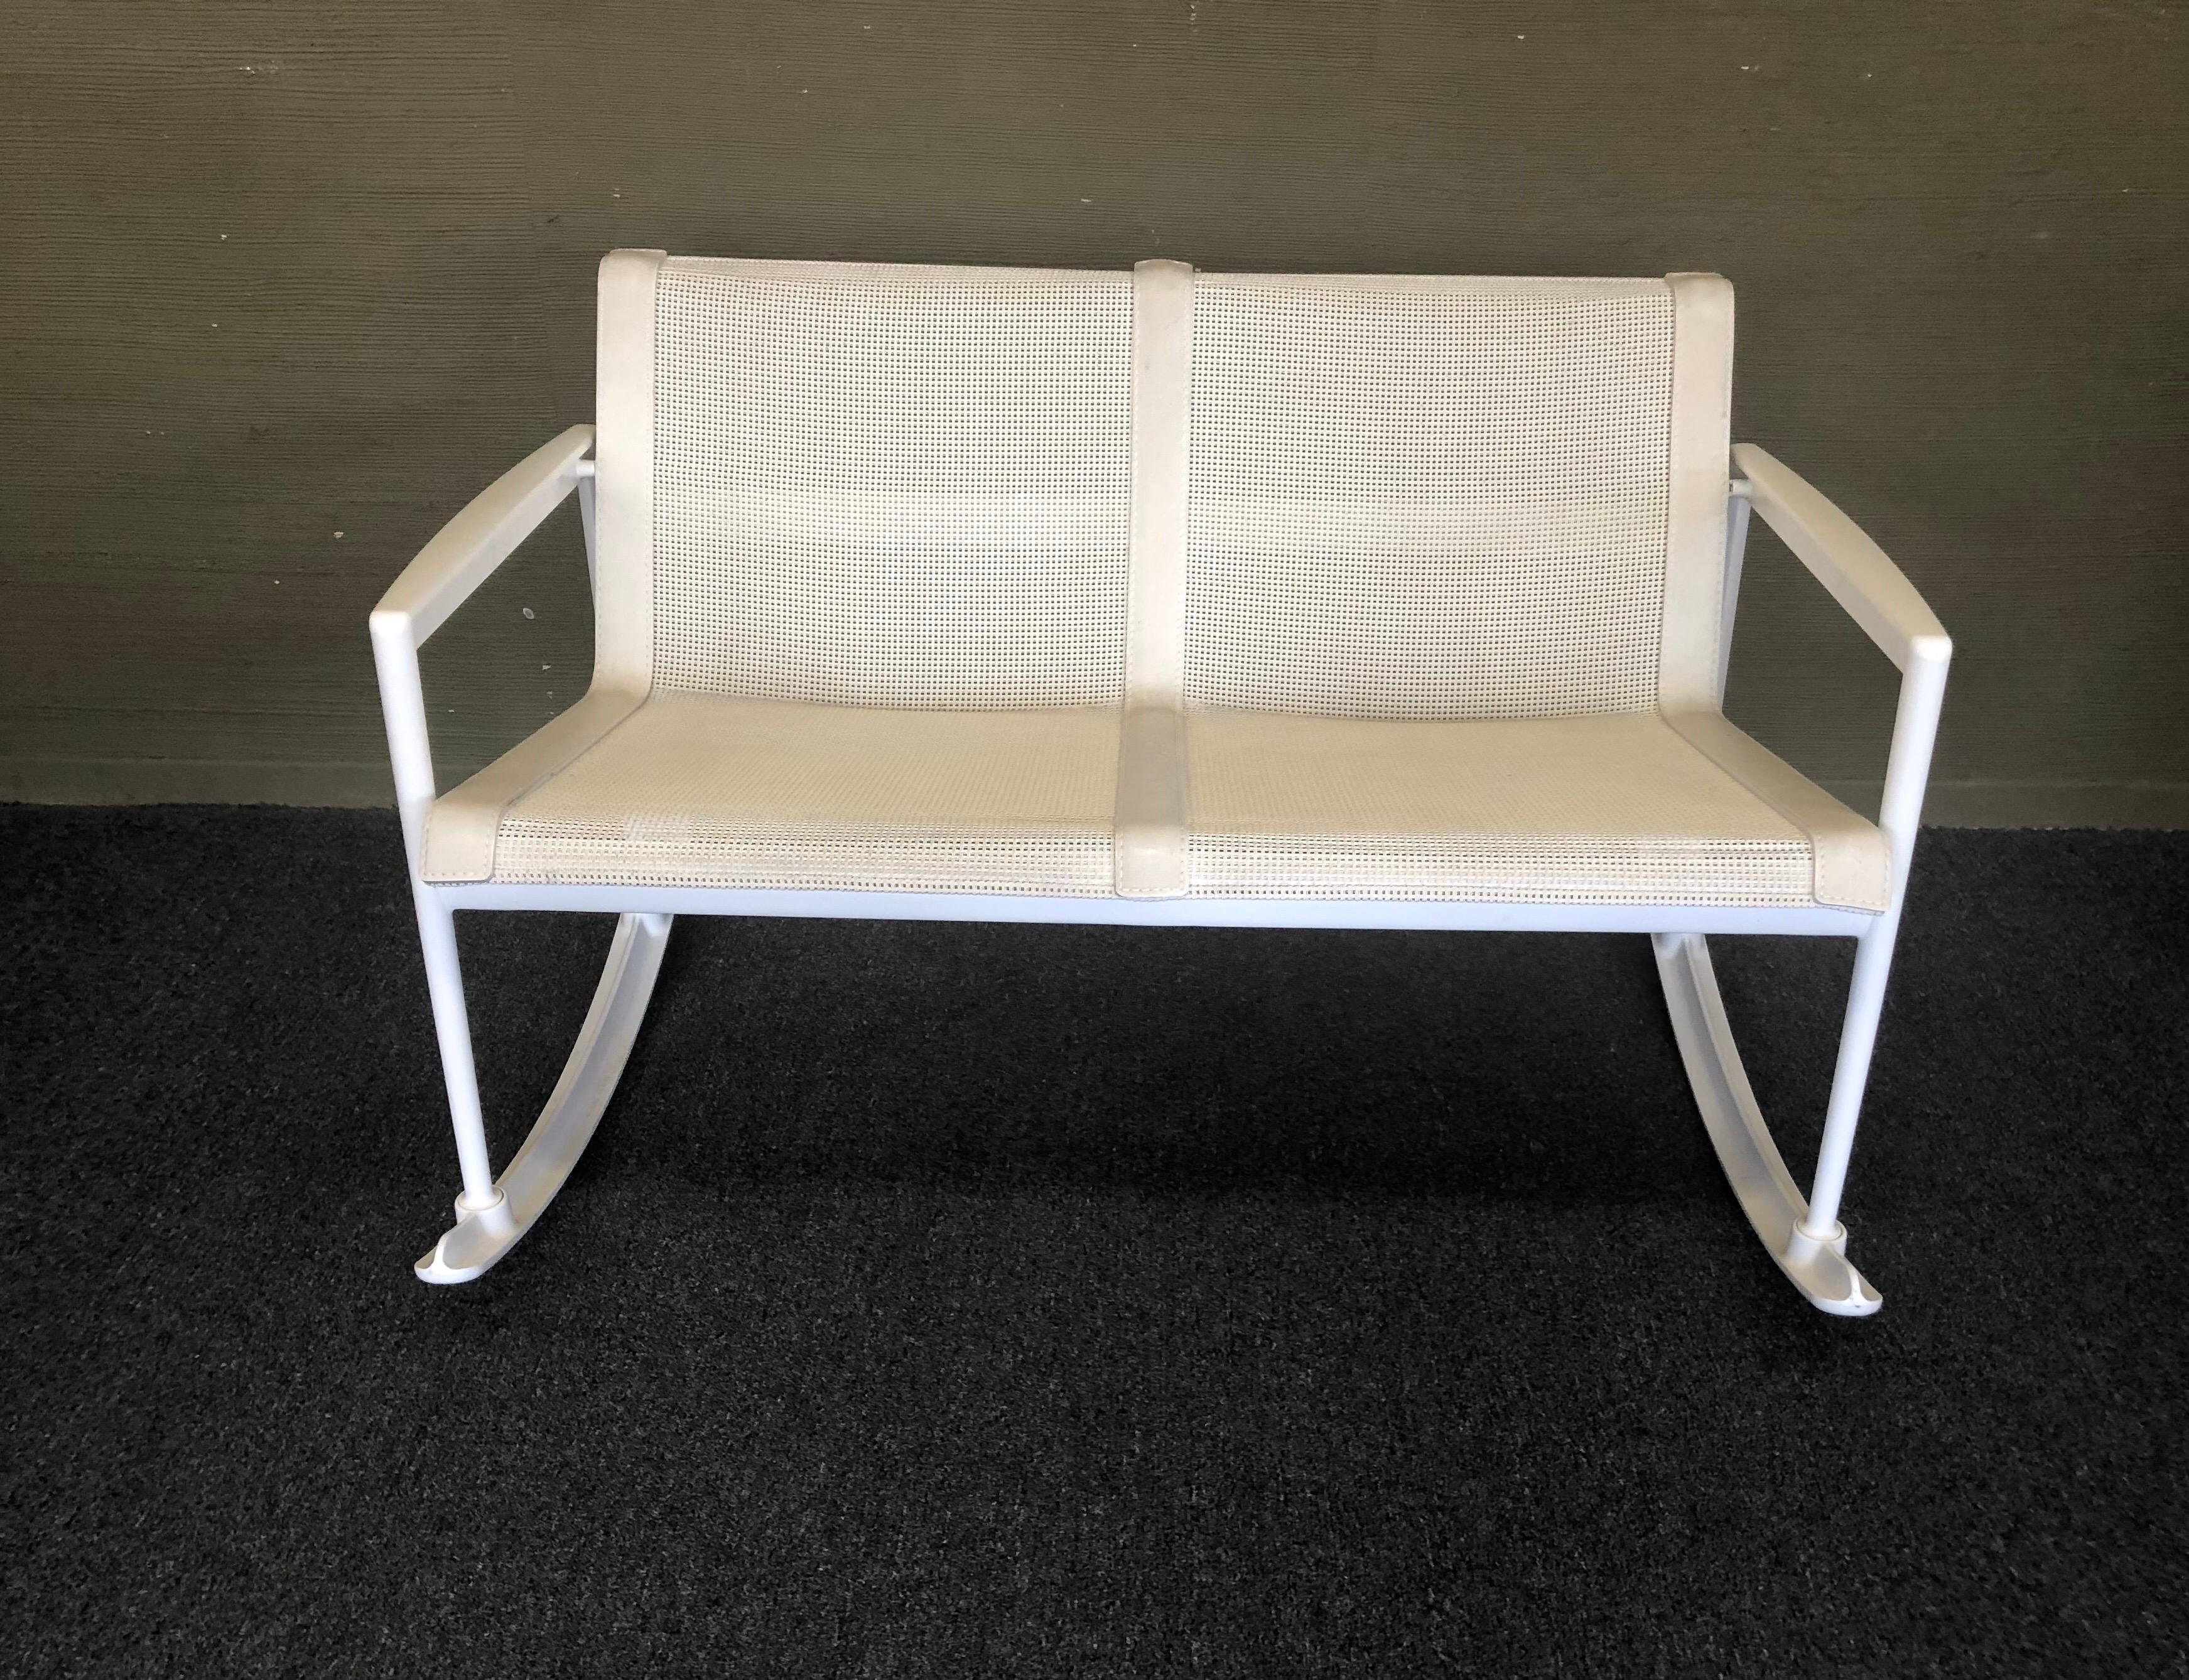 Super fun double rocker designed by Richard Schultz as part of his 1966 collection for Knoll, circa 1990s. Craving furniture that could stand up to the salty environment of her seaside home in Florida, Florence Knoll called on Richard Schultz to